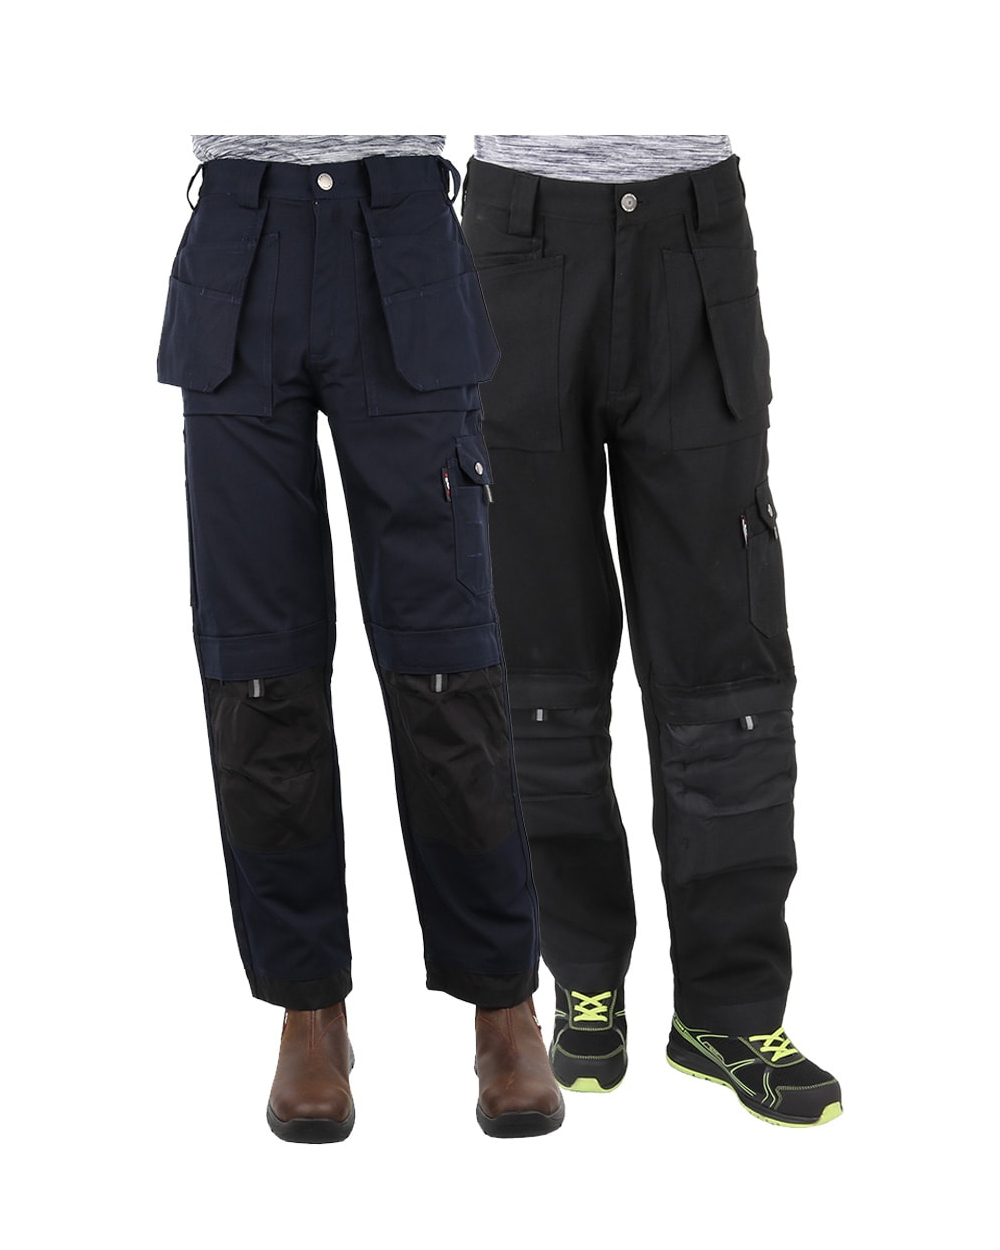 Perf Multi Pocket Work Trousers (CT3) - LA Safety Supplies